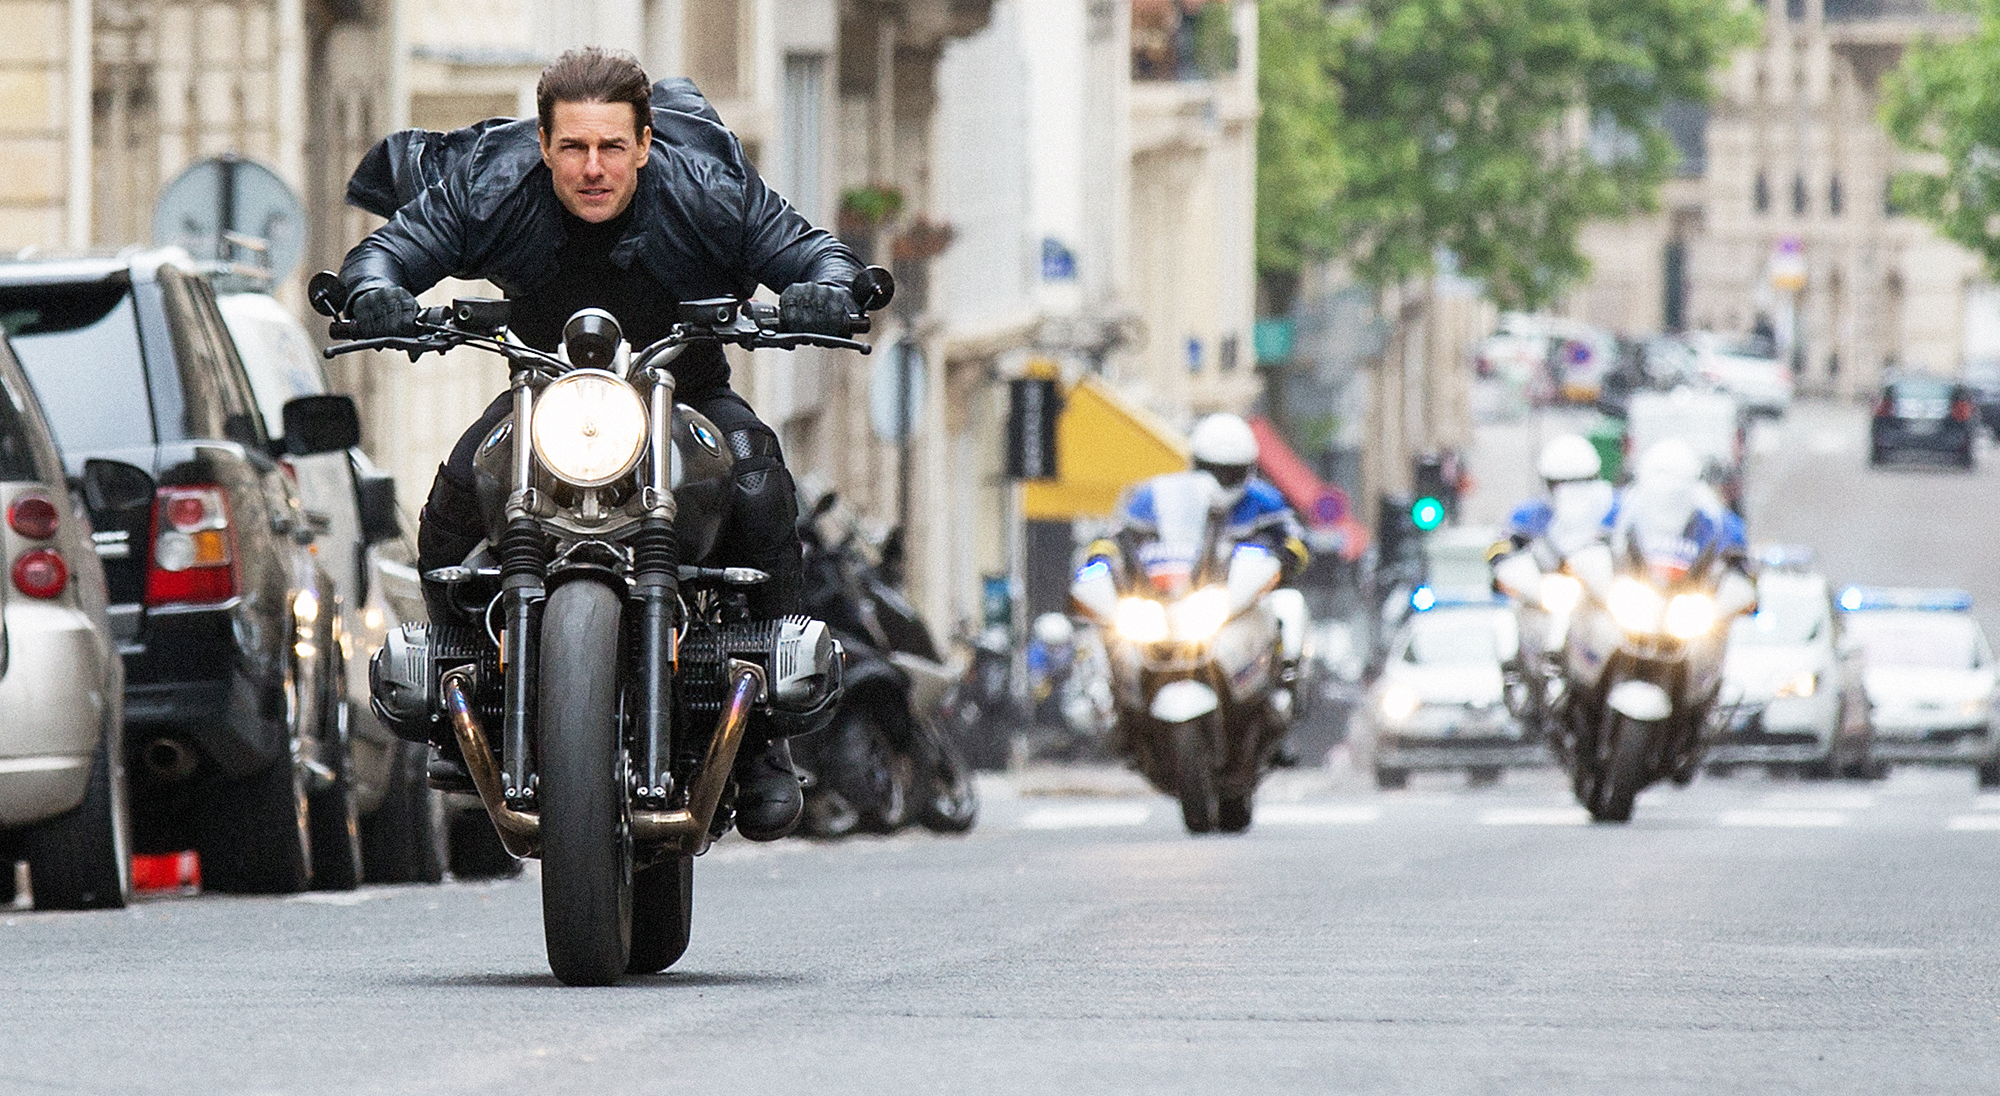 10. Mission: Impossible 7 (30.09)